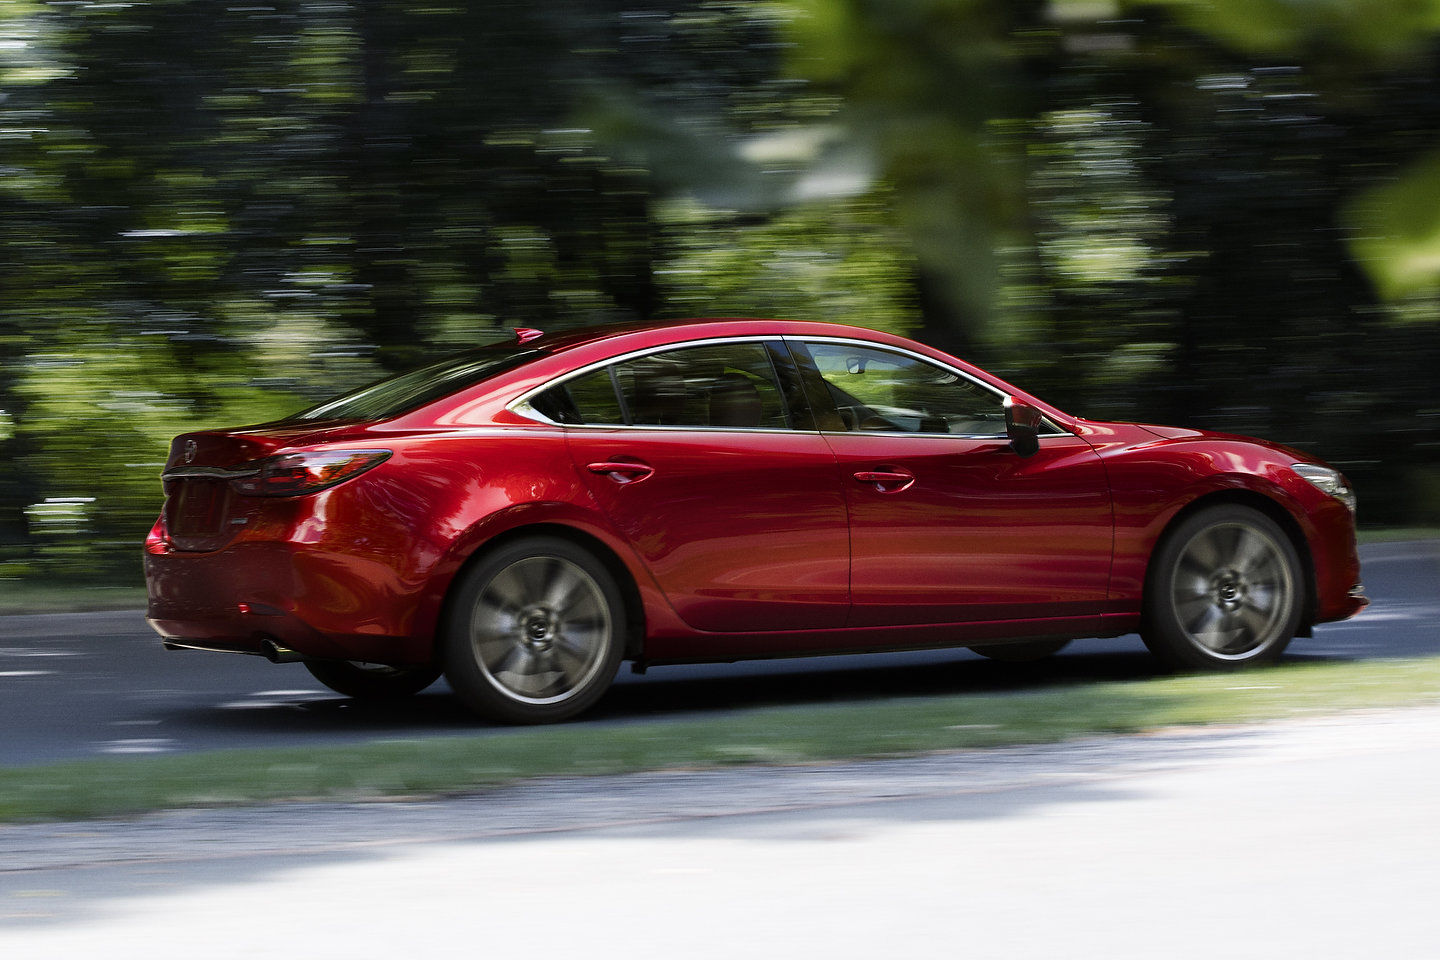 2019 Mazda6 receives Top Safety Pick from IIHS